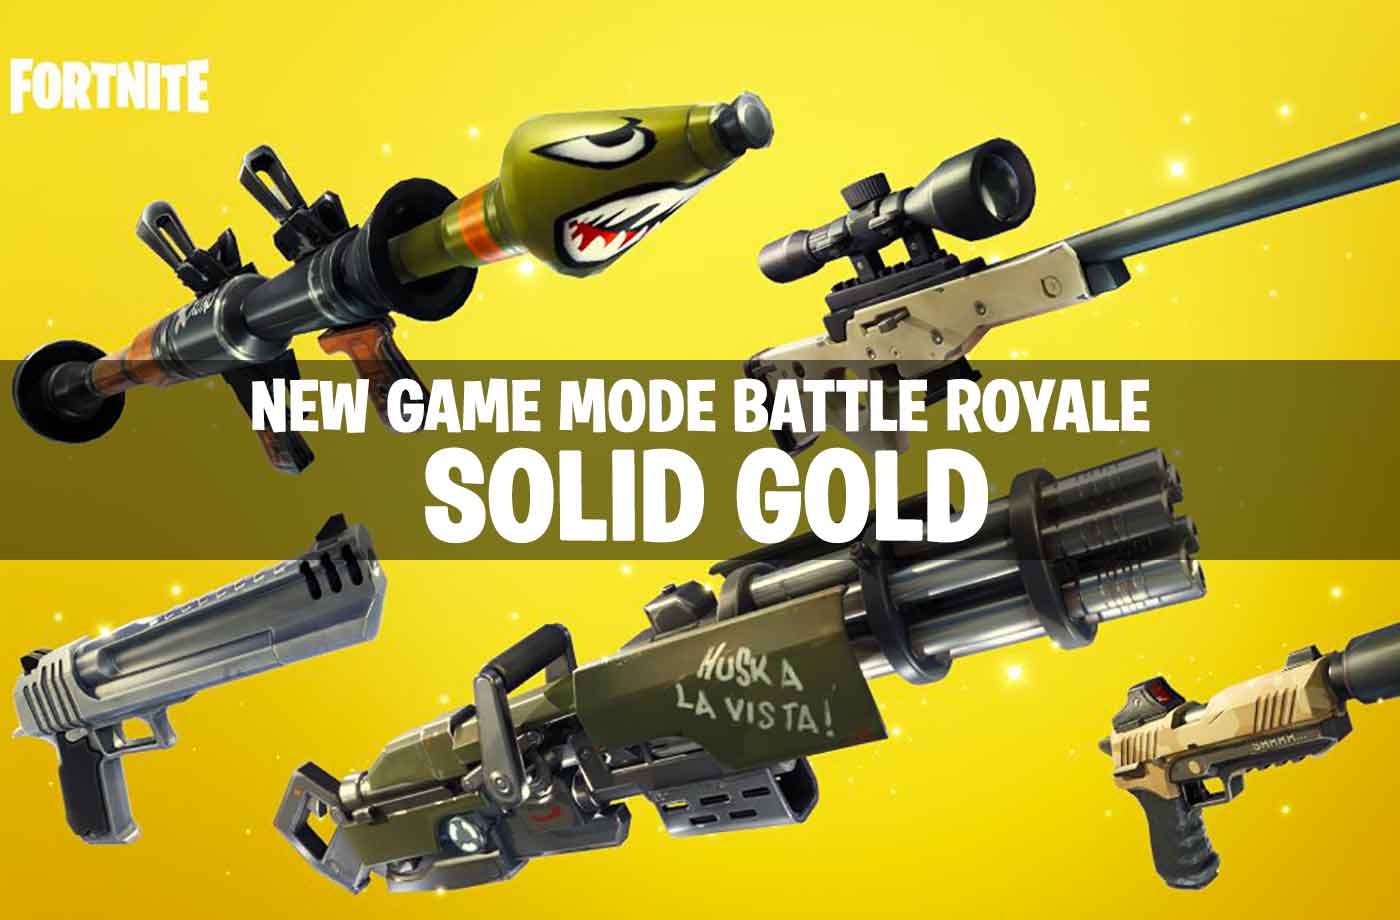 Fortnite Battle Royale All You Need To Know About The New Solid Gold - fortnite battle royale all you need to know about the new solid gold mode game